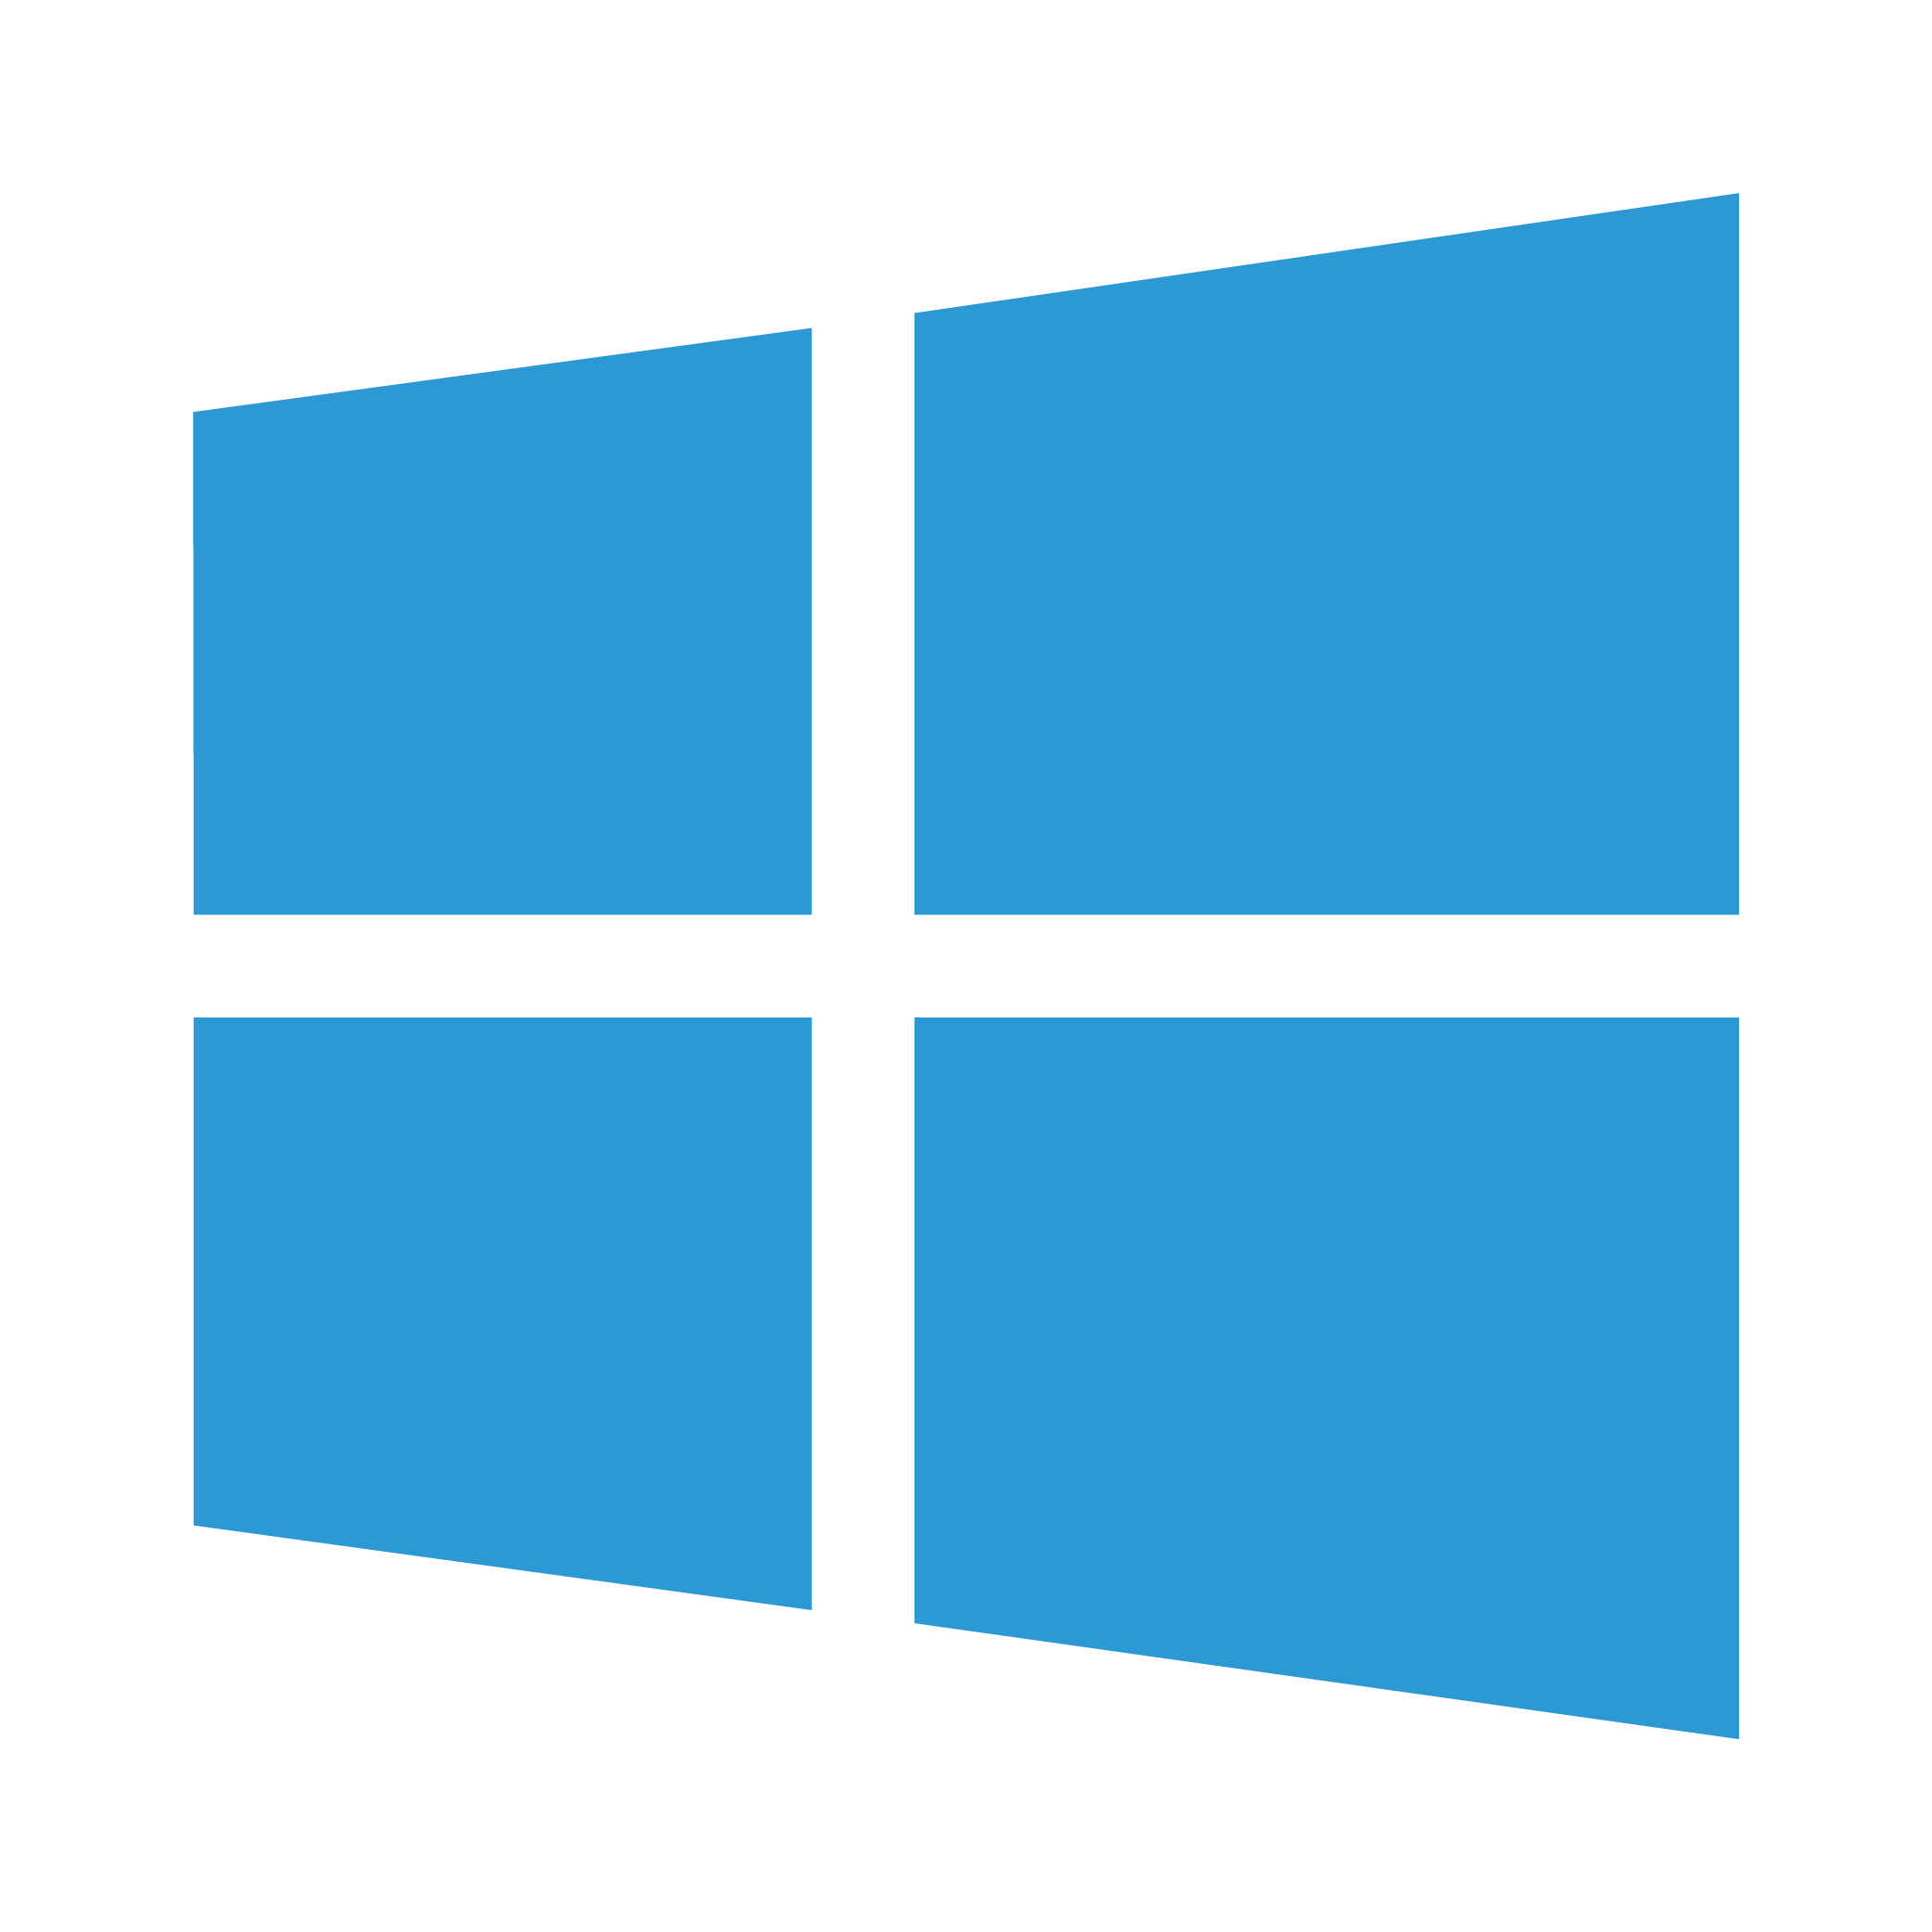 Windows operating systems